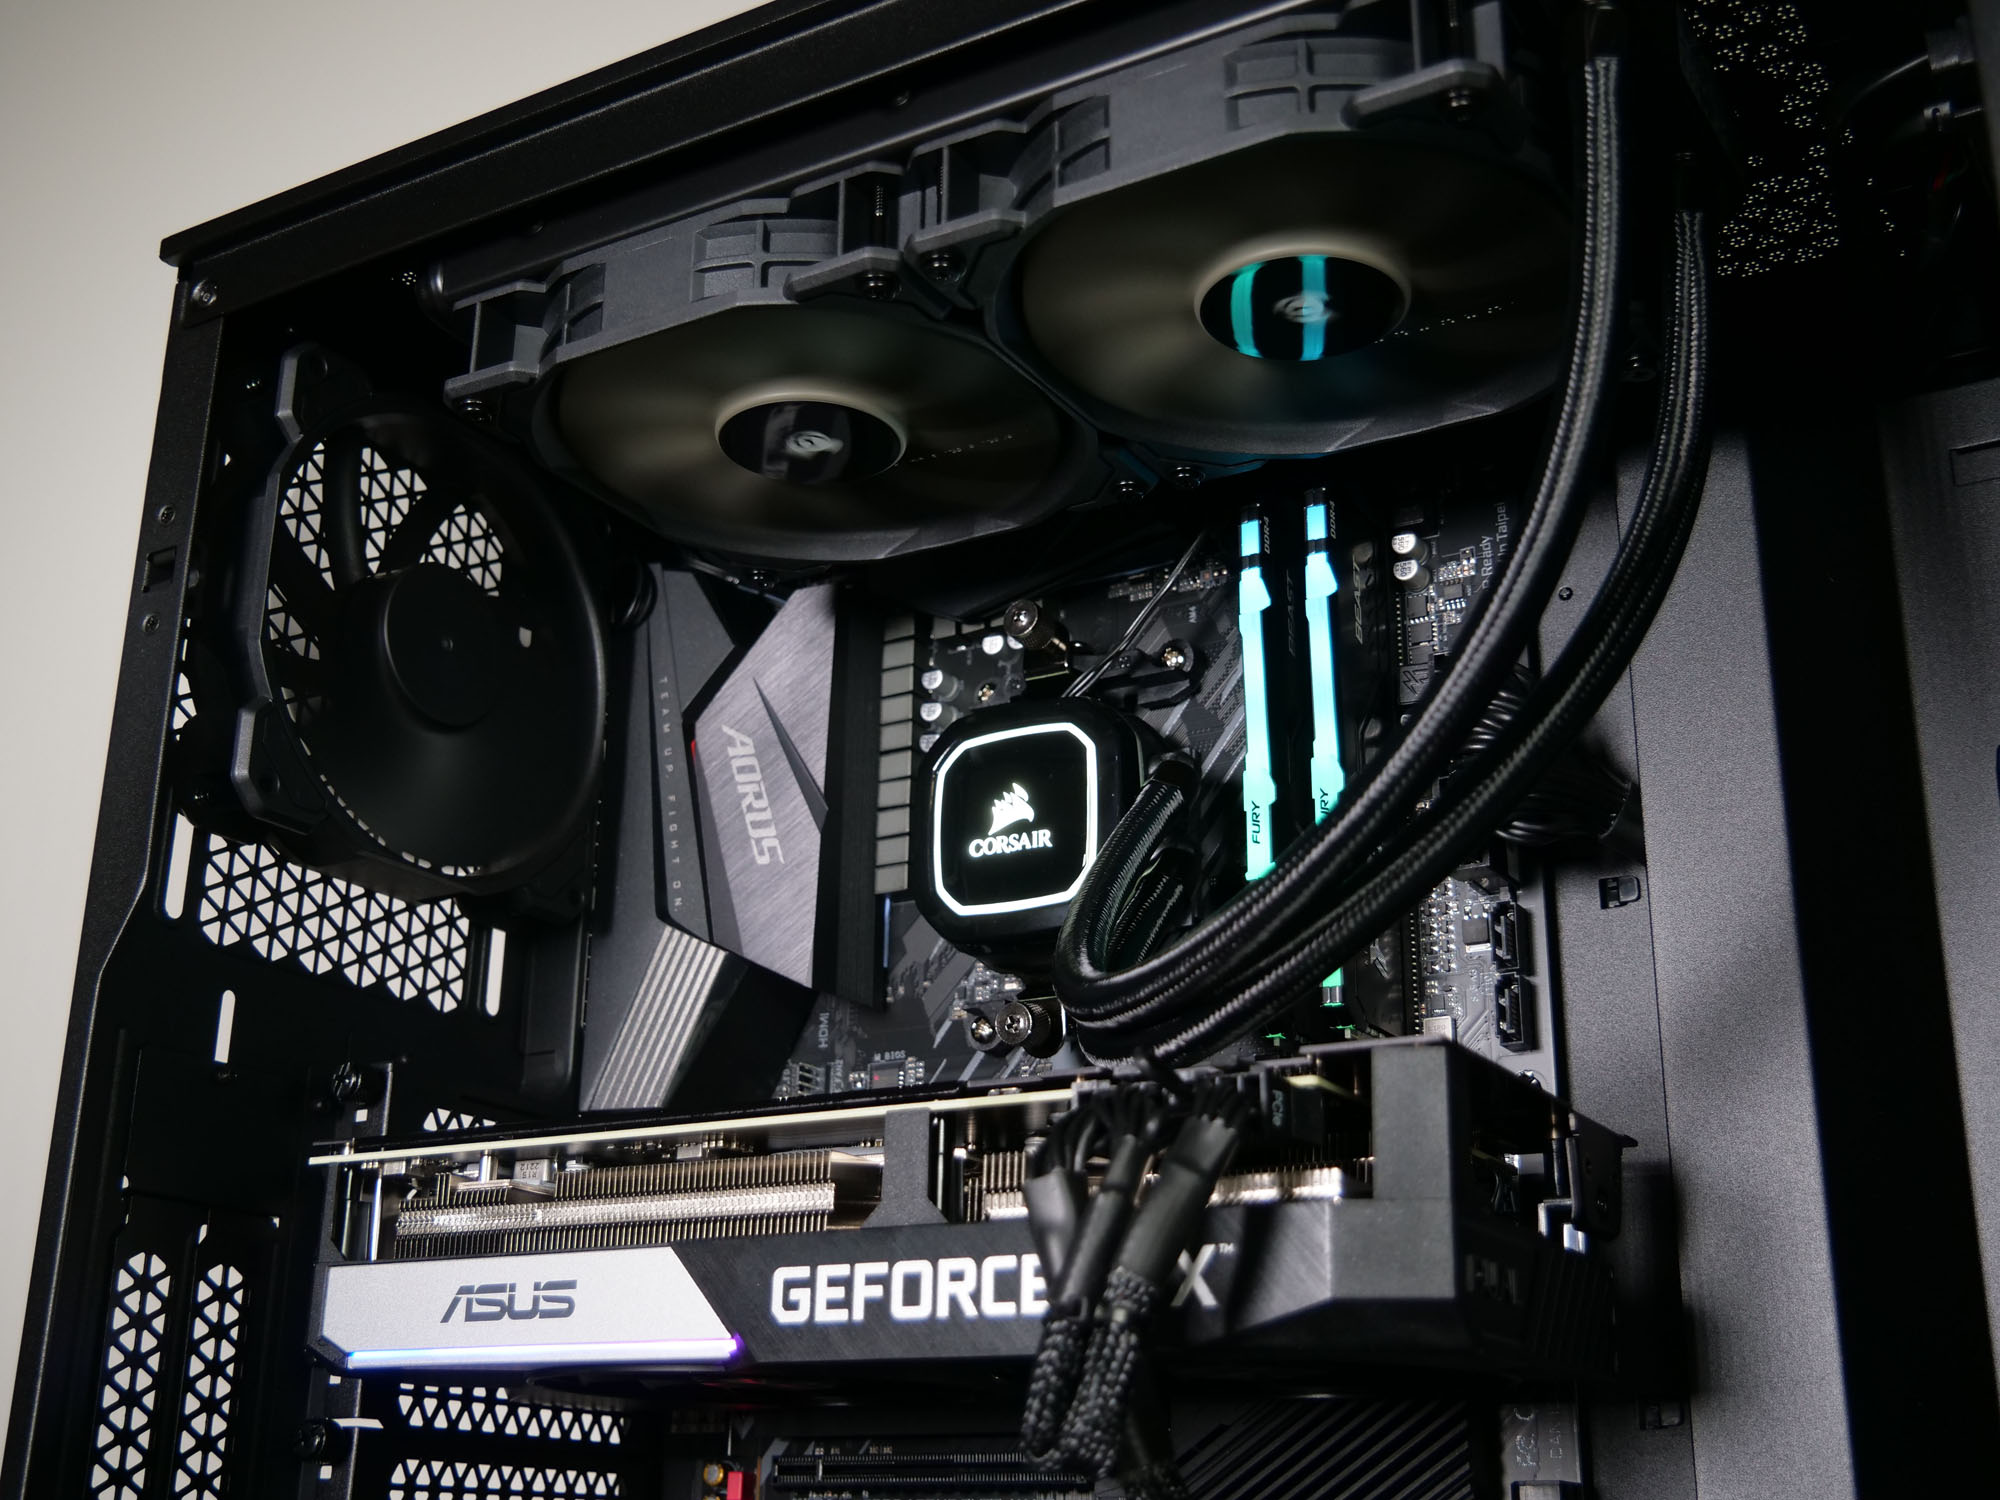 View of the All-in-One CPU cooler installed in a Chillblast Vanta Black R7 RTX 3070 Gaming PC.